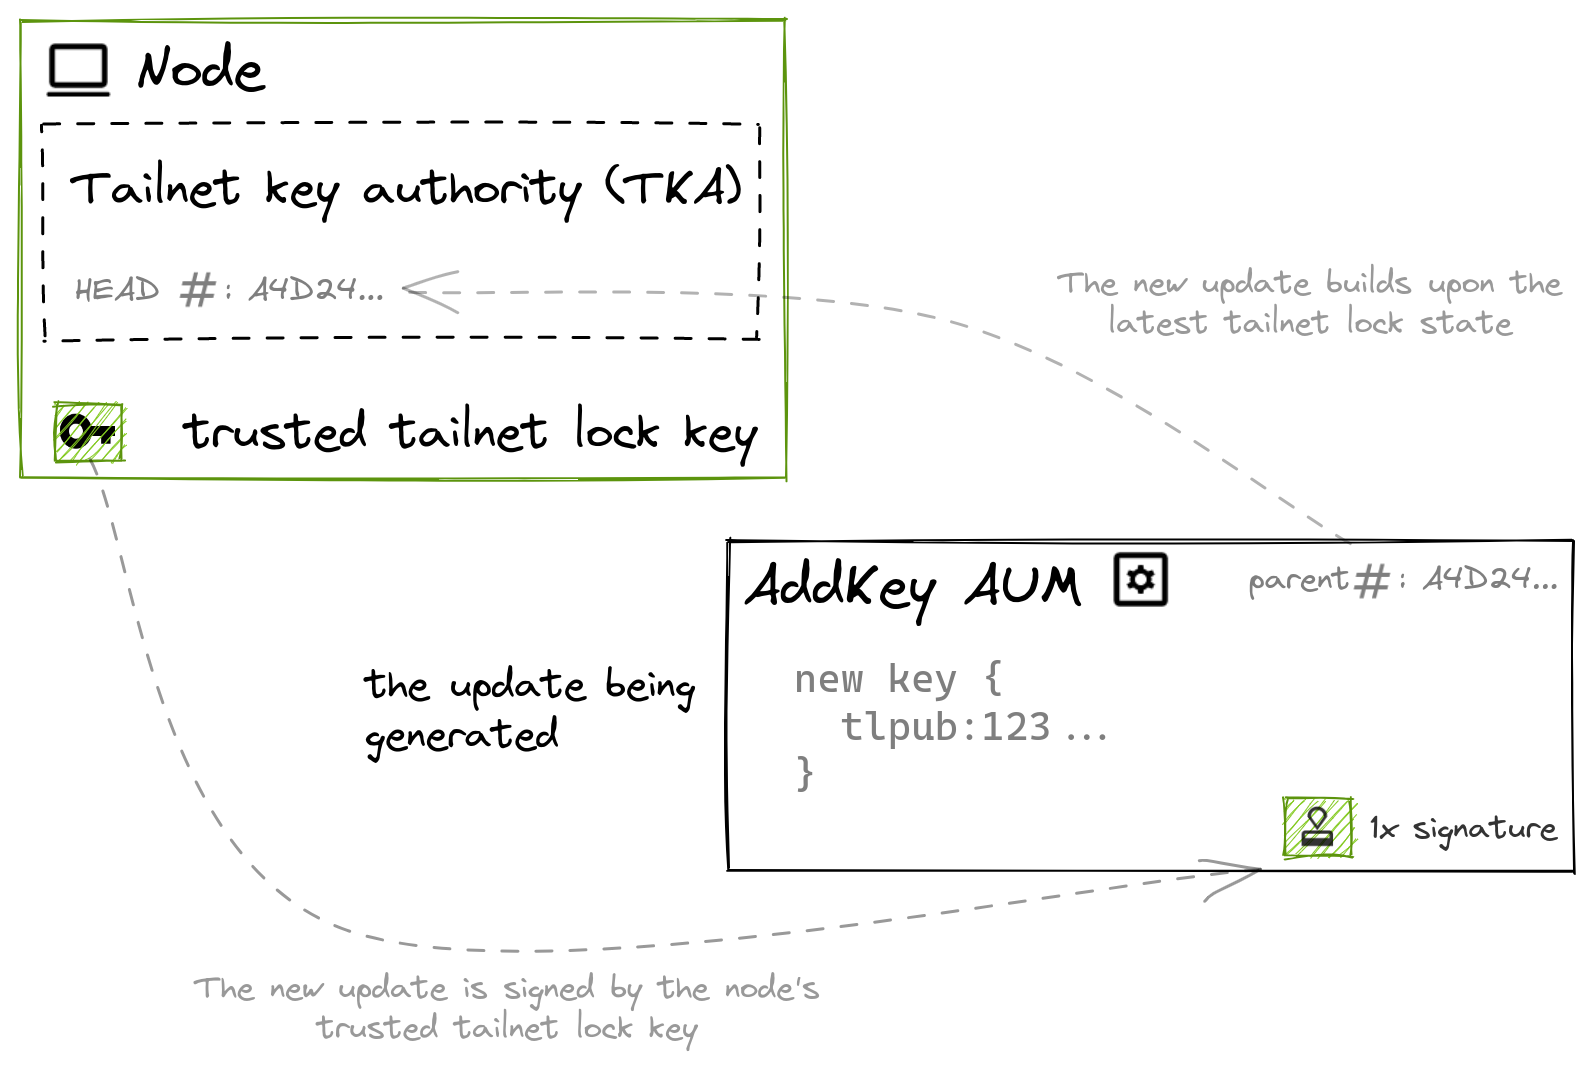 An incremental authority update message encodes the HEAD of the tailnet key authority as the hash of the previous update, to build upon the latest tailnet lock state.